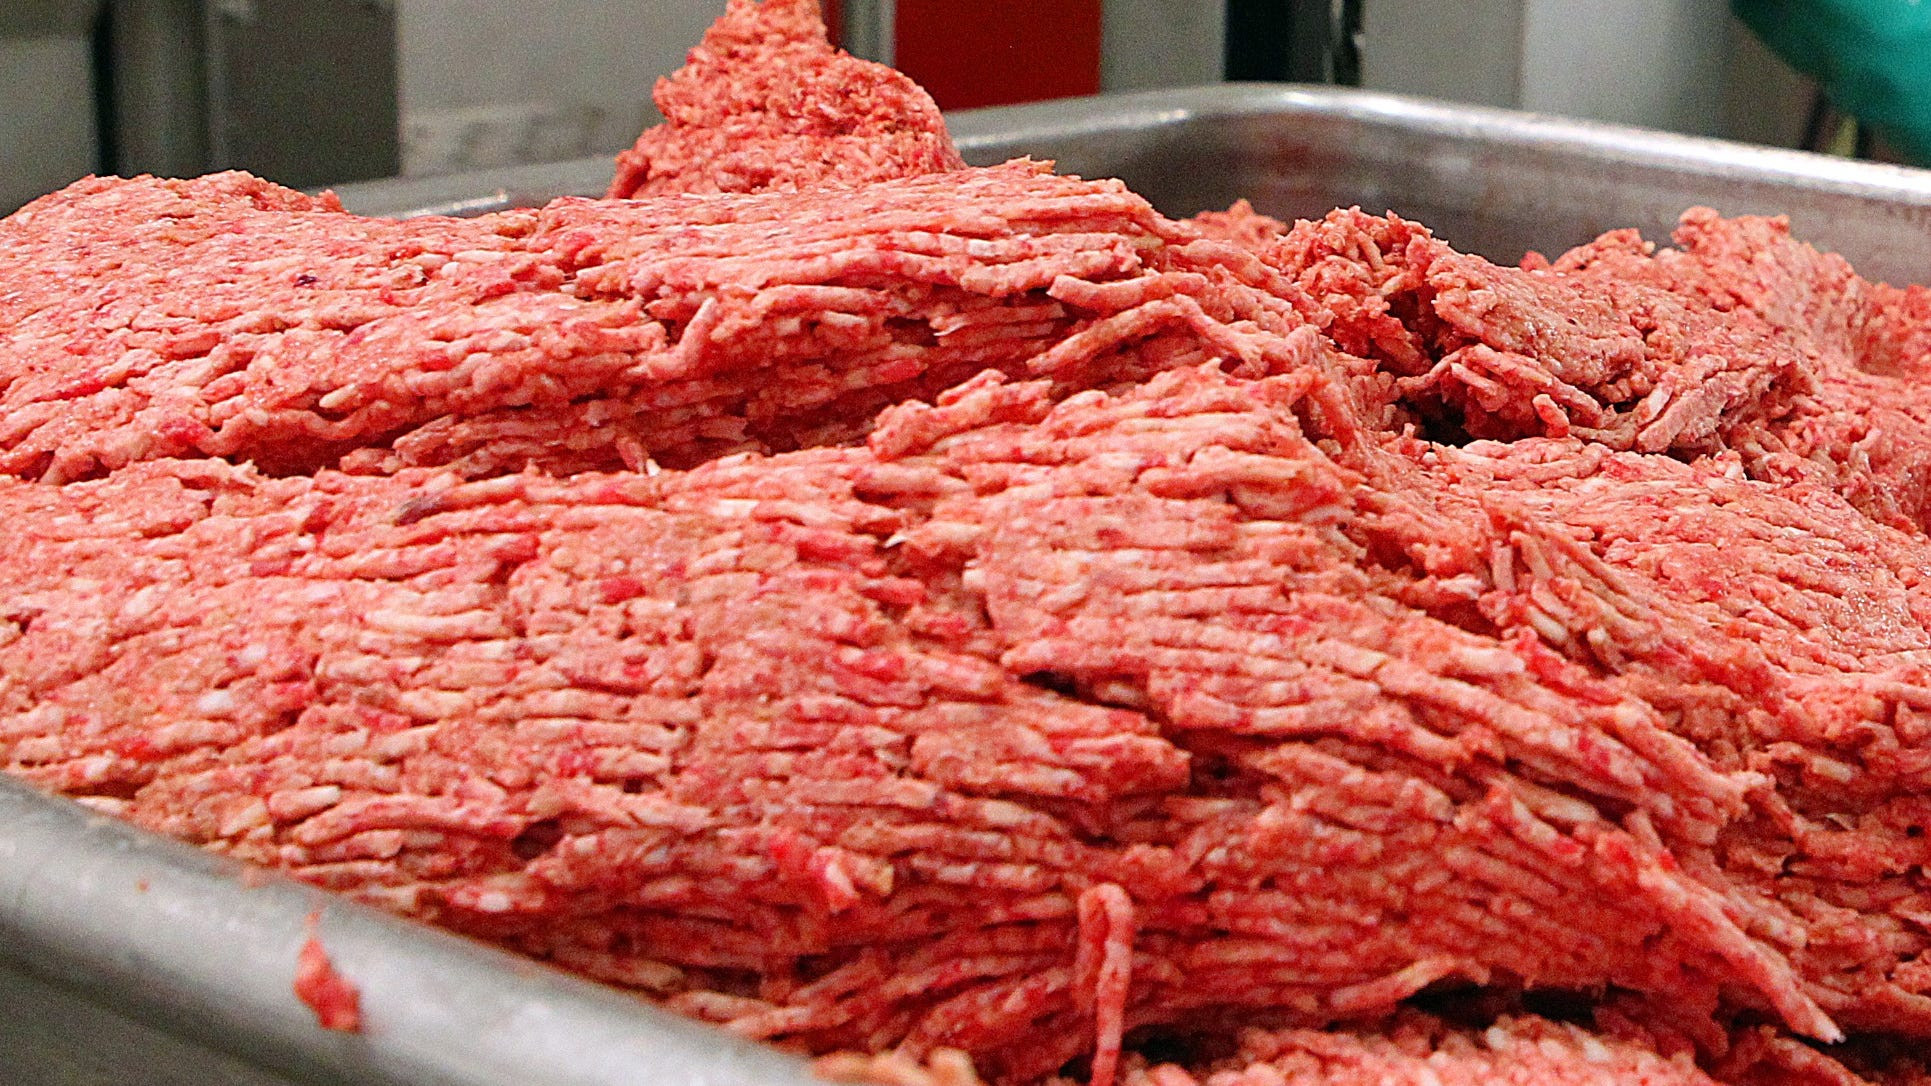 Ground Beef Salmonella Outbreak Inspirational Salmonella Outbreak Linked to Ground Beef Hits Six States